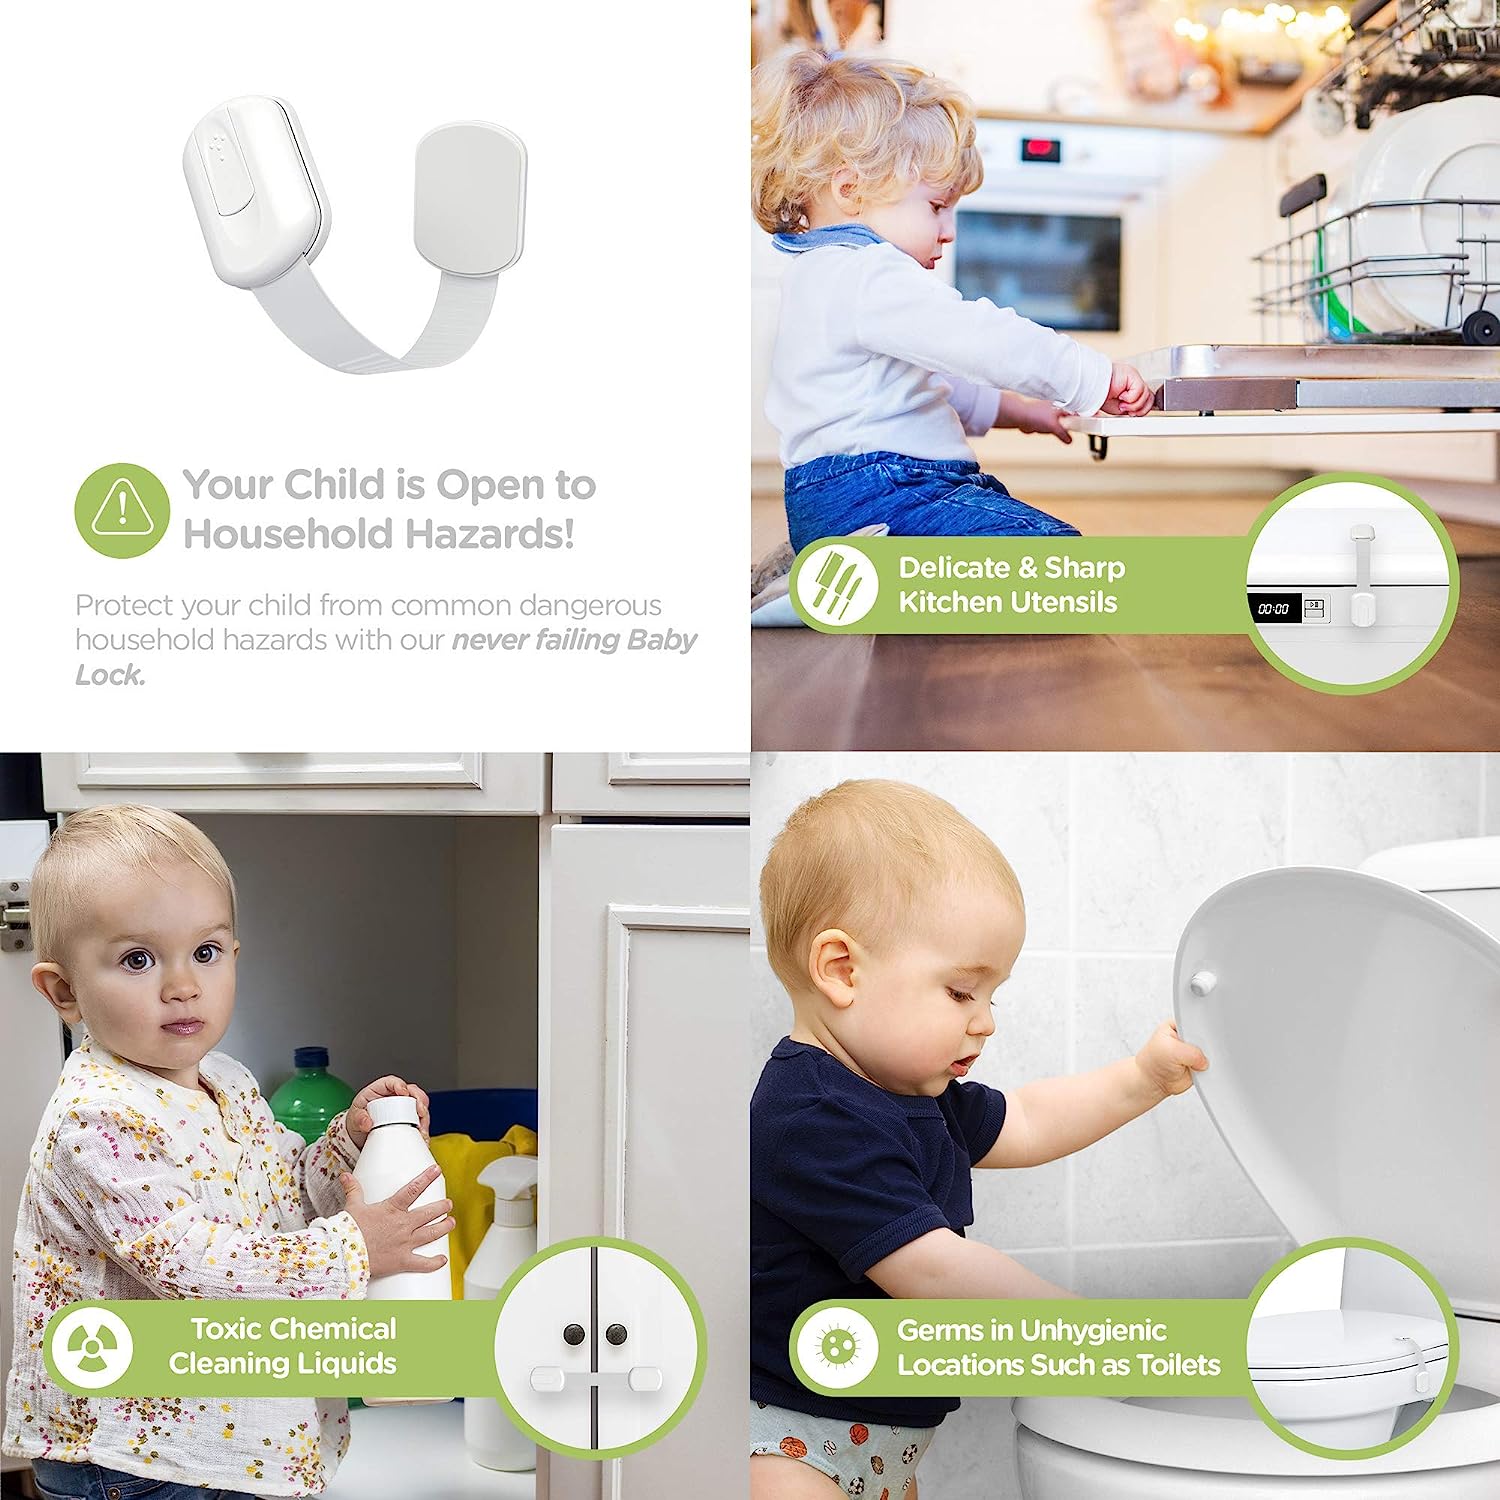 SKYLA HOMES Baby Locks (8-Pack) Child Safety Cabinet Proofing - Safe Quick and Easy 3M Adhesive Cabinet Drawer Door Latches No Screws & Magnets Multi-Purpose for Furniture Kitchen Ovens Toilet Seats